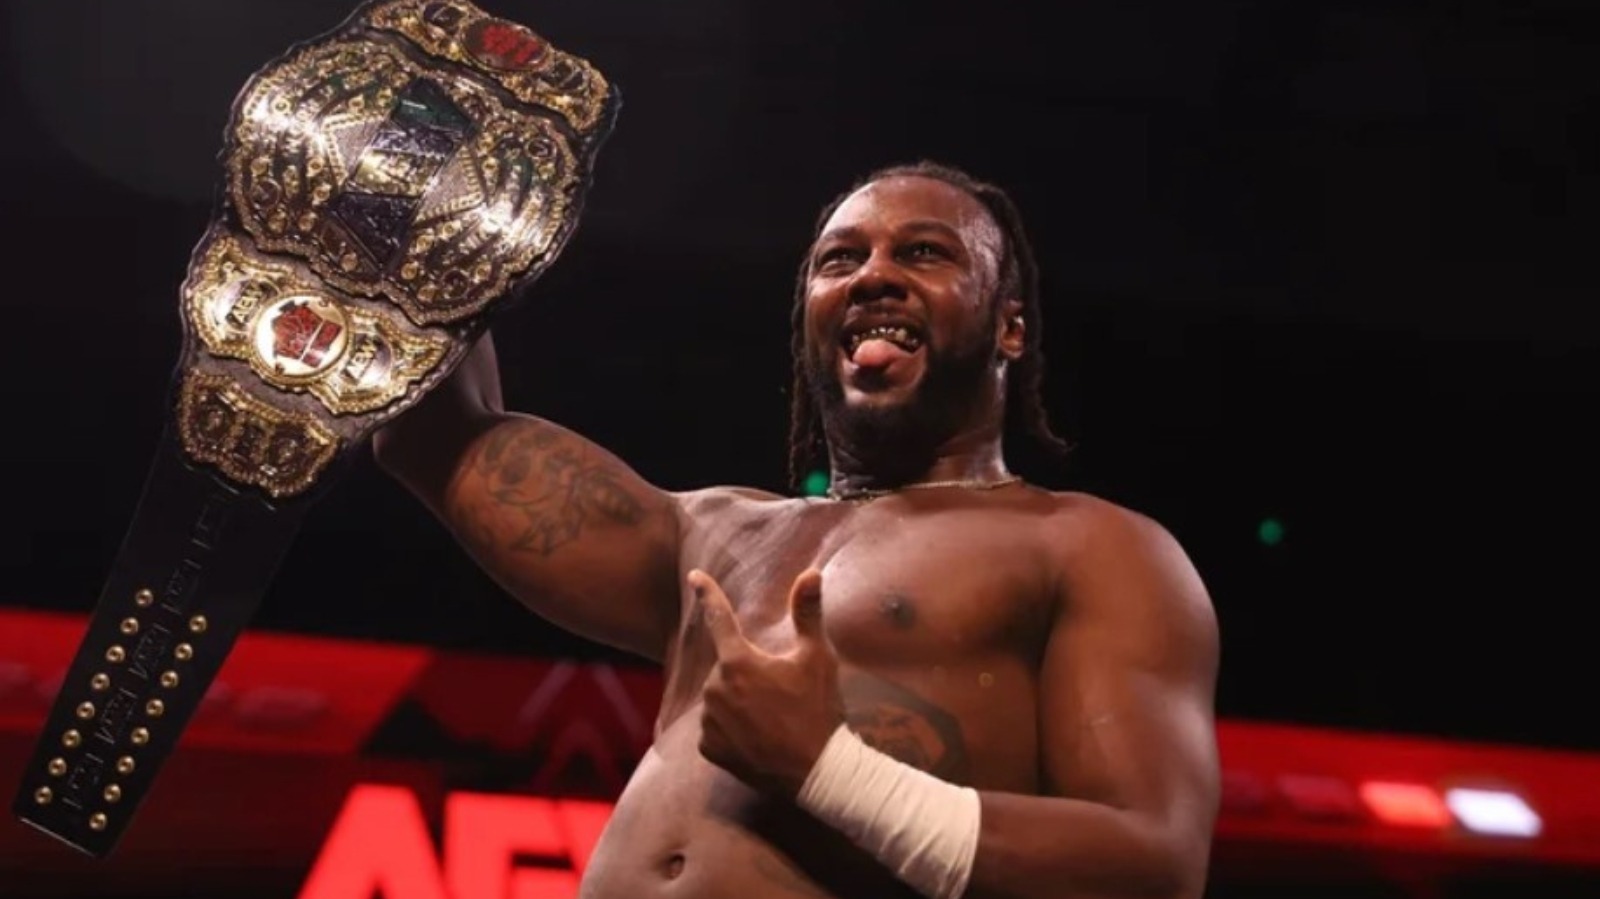 Swerve Strickland's AEW World Title Opponent At Double Or Nothing Revealed On Dynamite